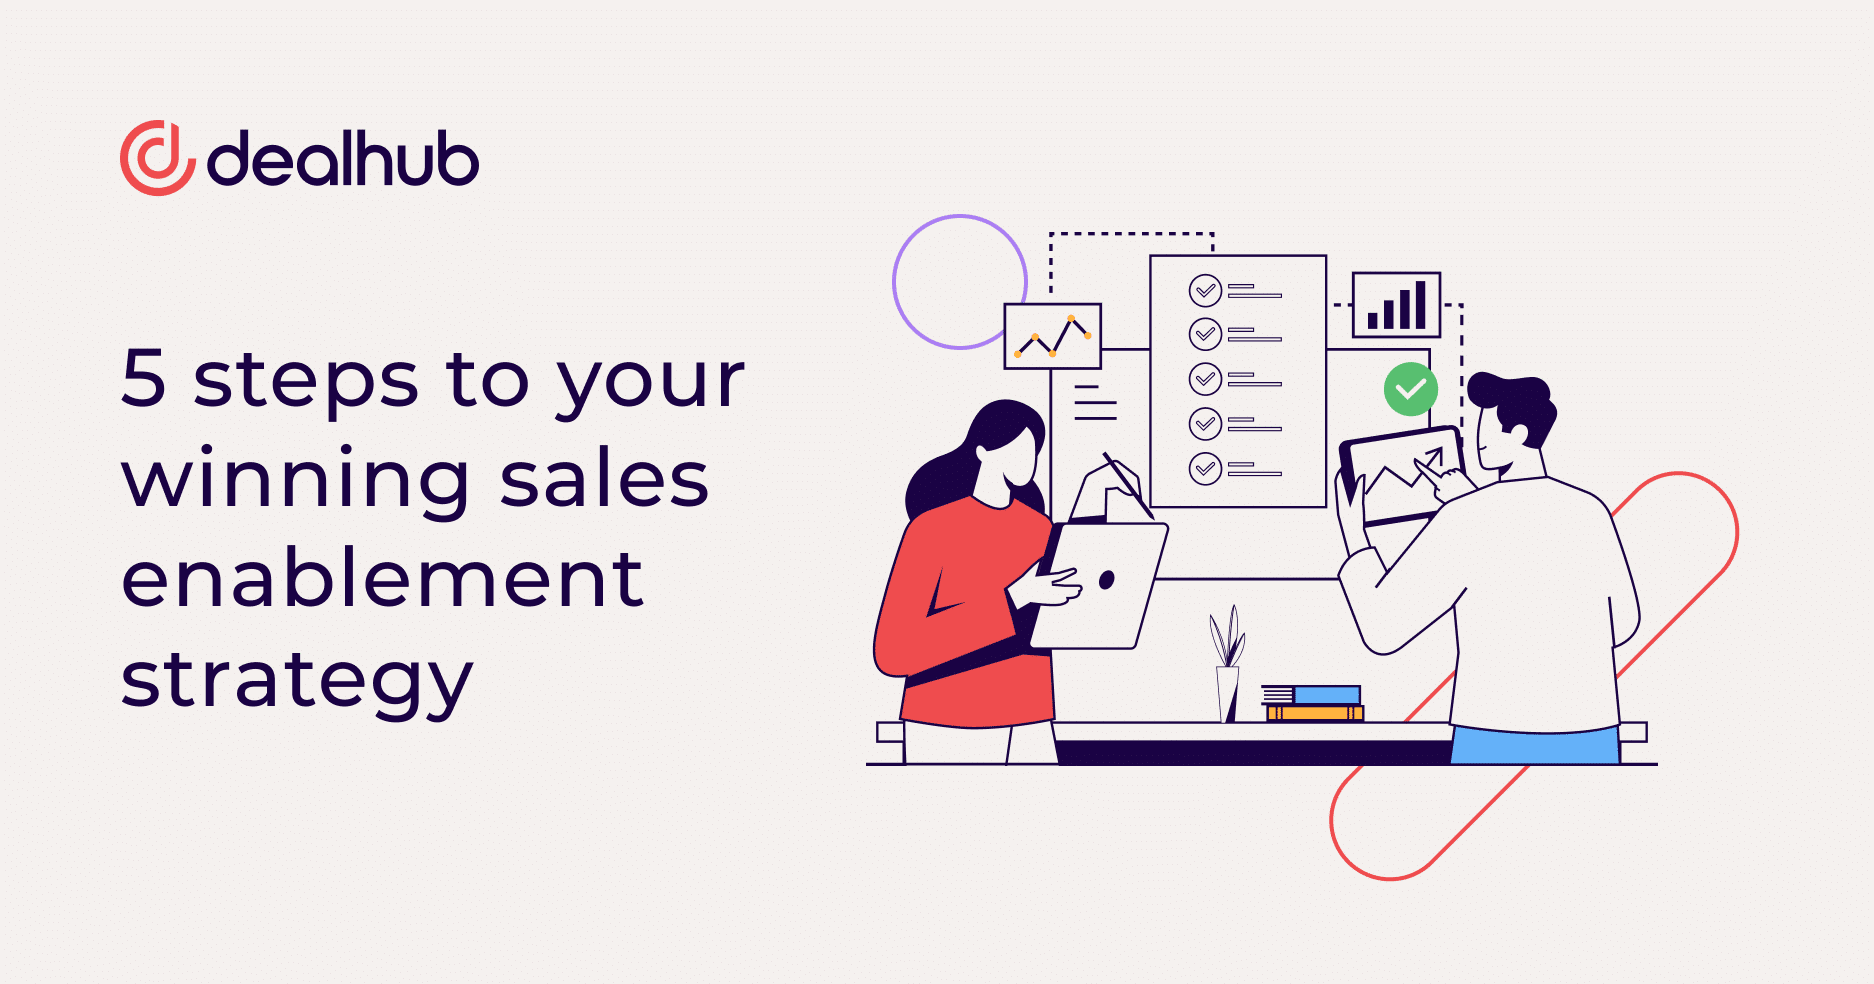 5 steps to your winning sales enablement strategy